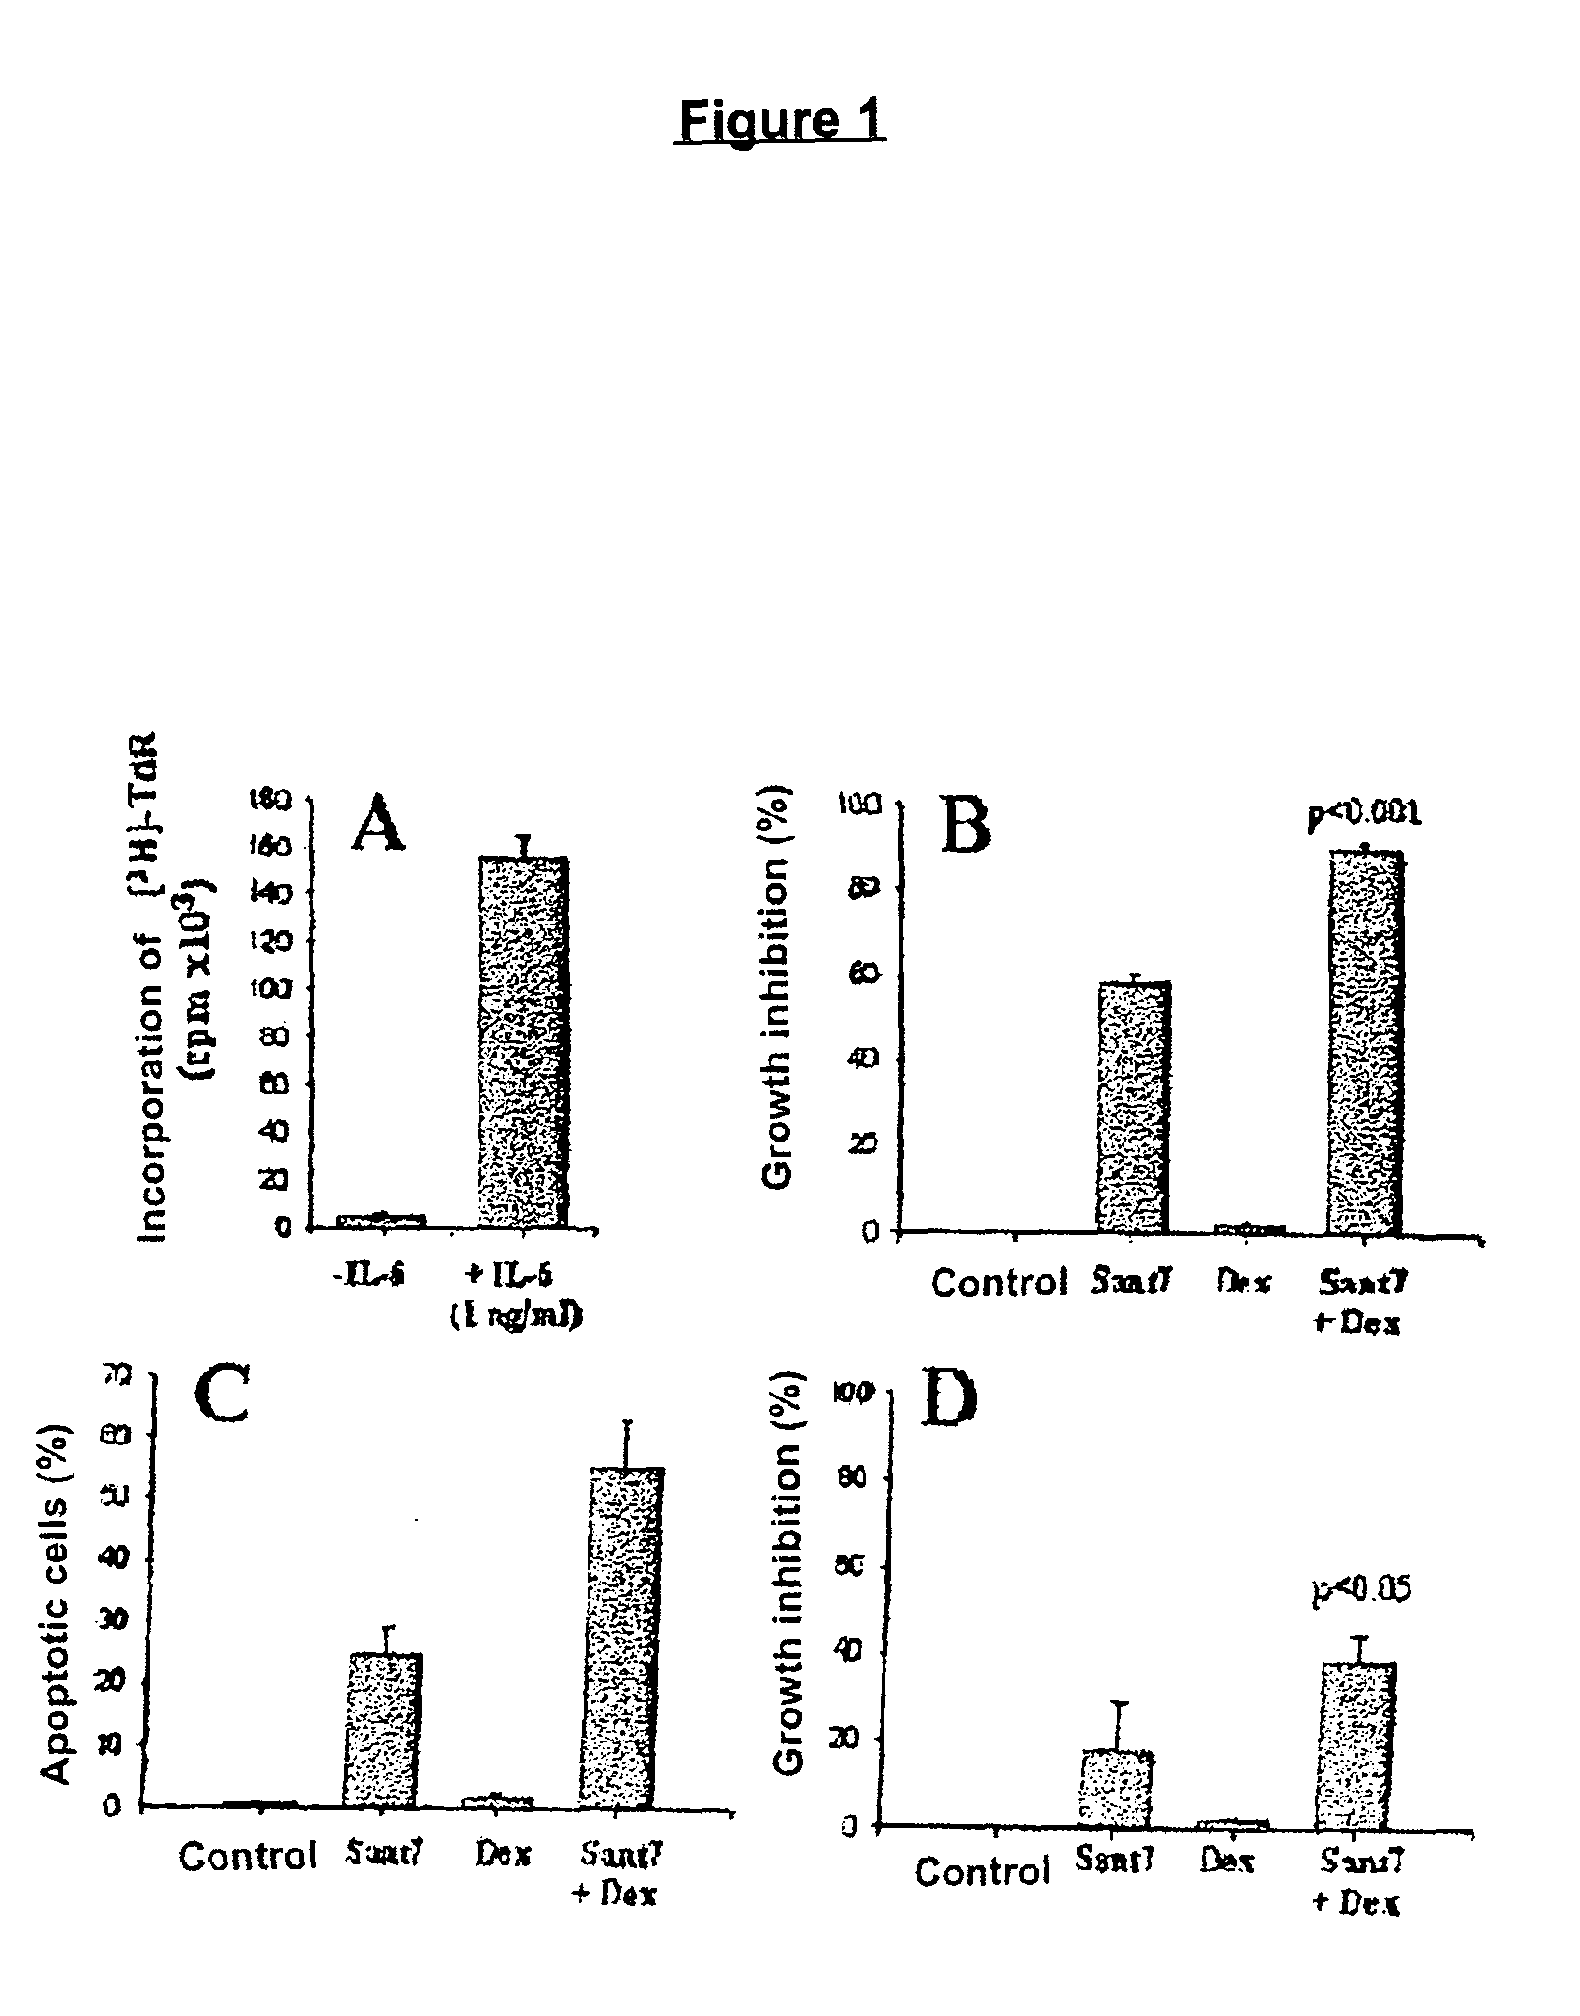 Combination of interleukin-6 antagonists and antiproliferative drugs